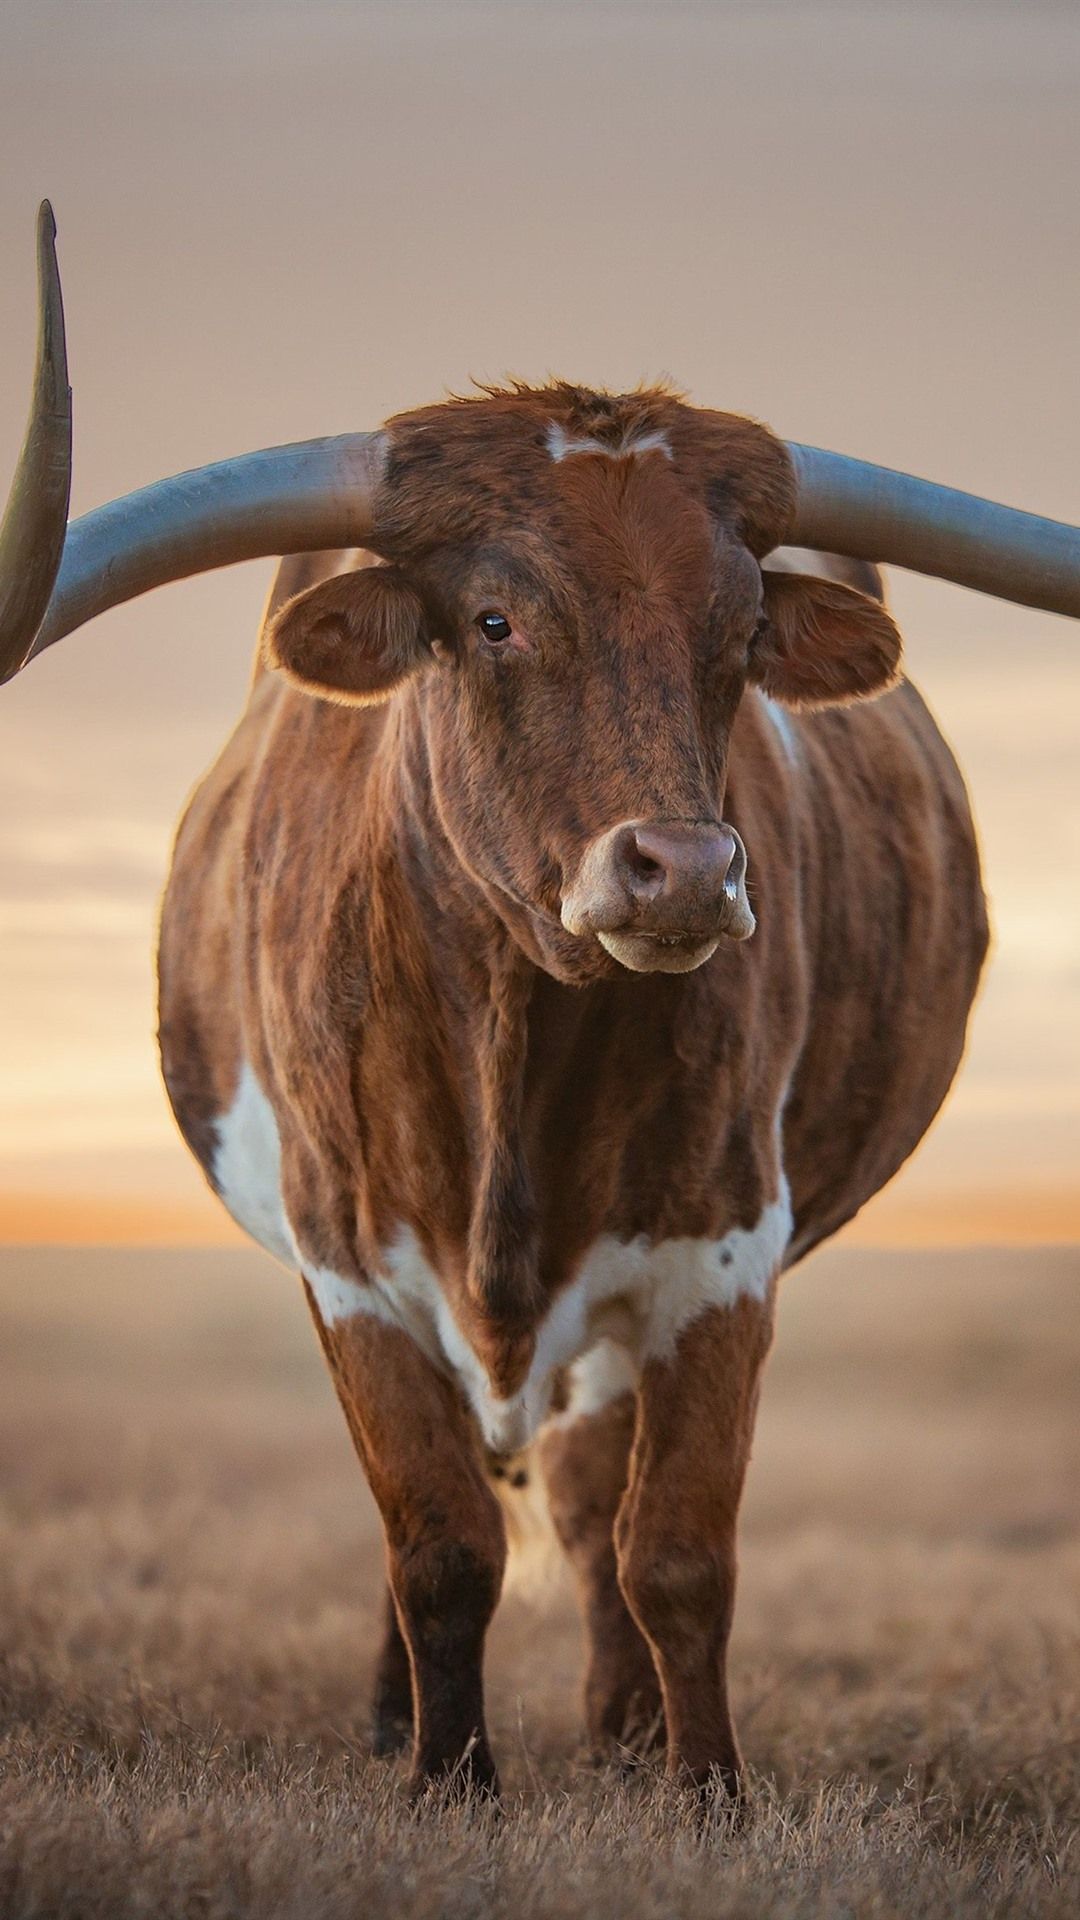 Cow Front View, Horns, Grass, Sunset 1080x1920 IPhone 8 7 6 6S Plus Wallpaper, Background, Picture, Image